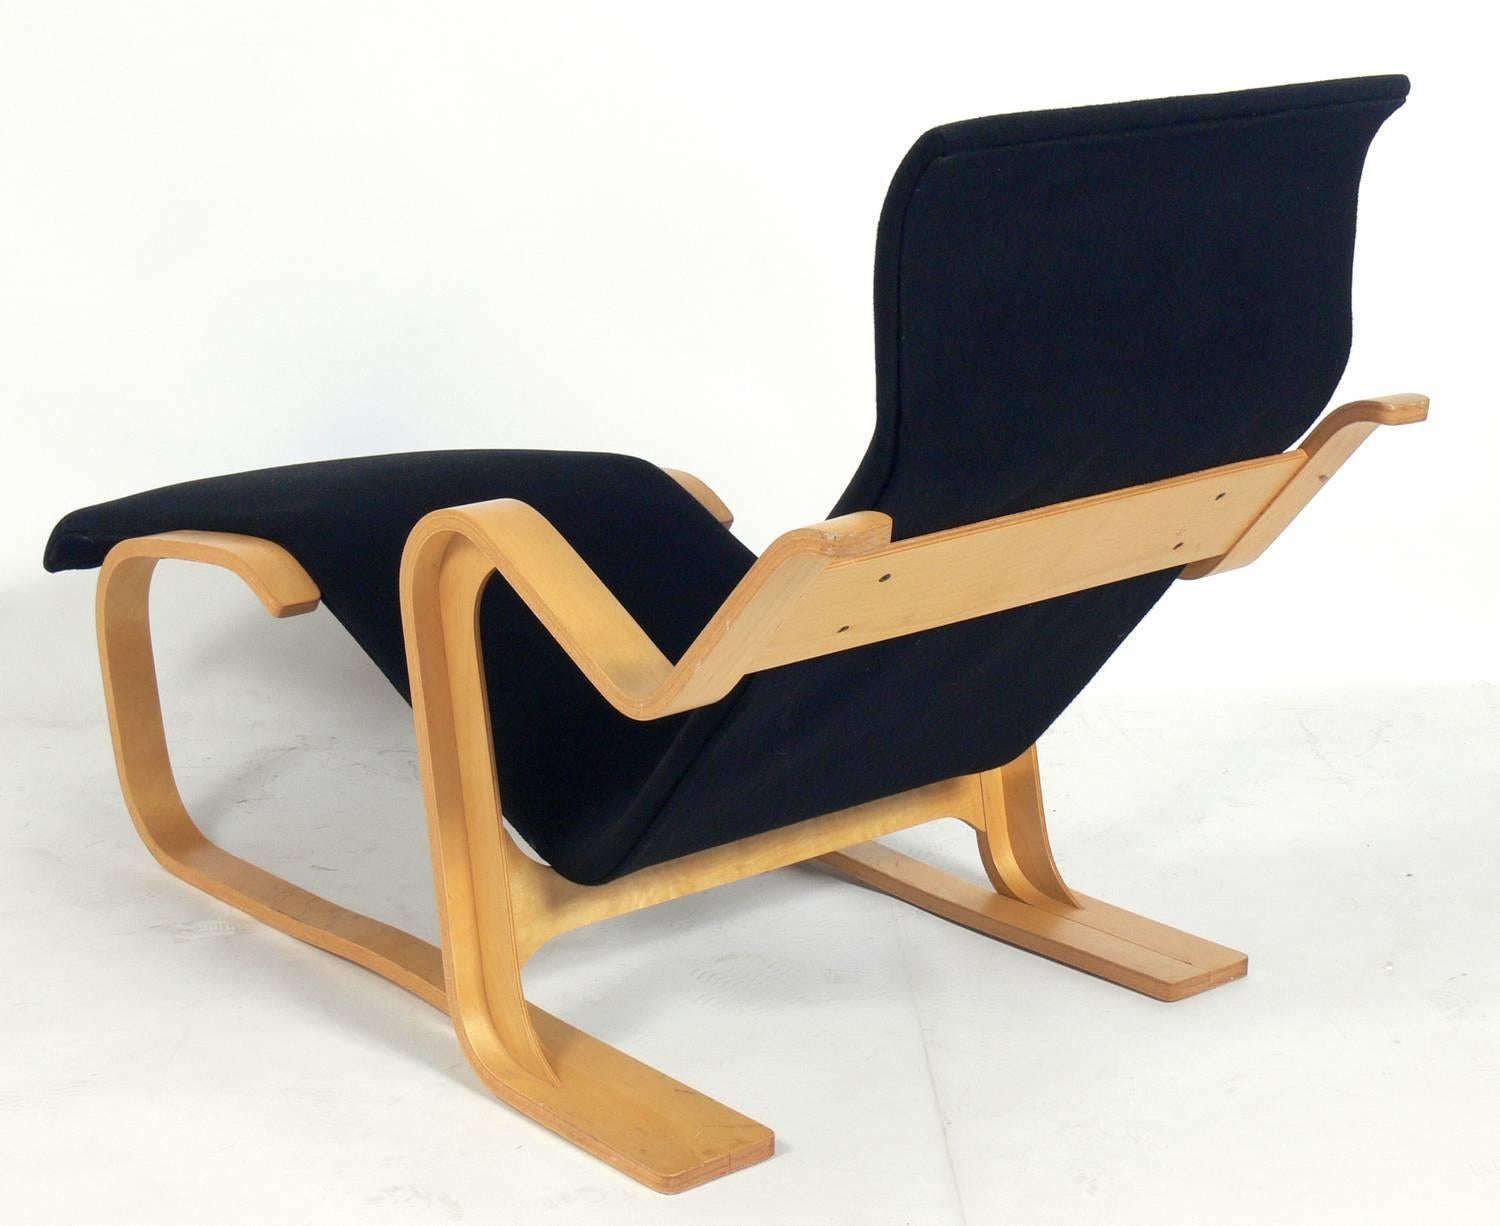 American Sculptural Bentwood Chaise Longue by Marcel Breuer